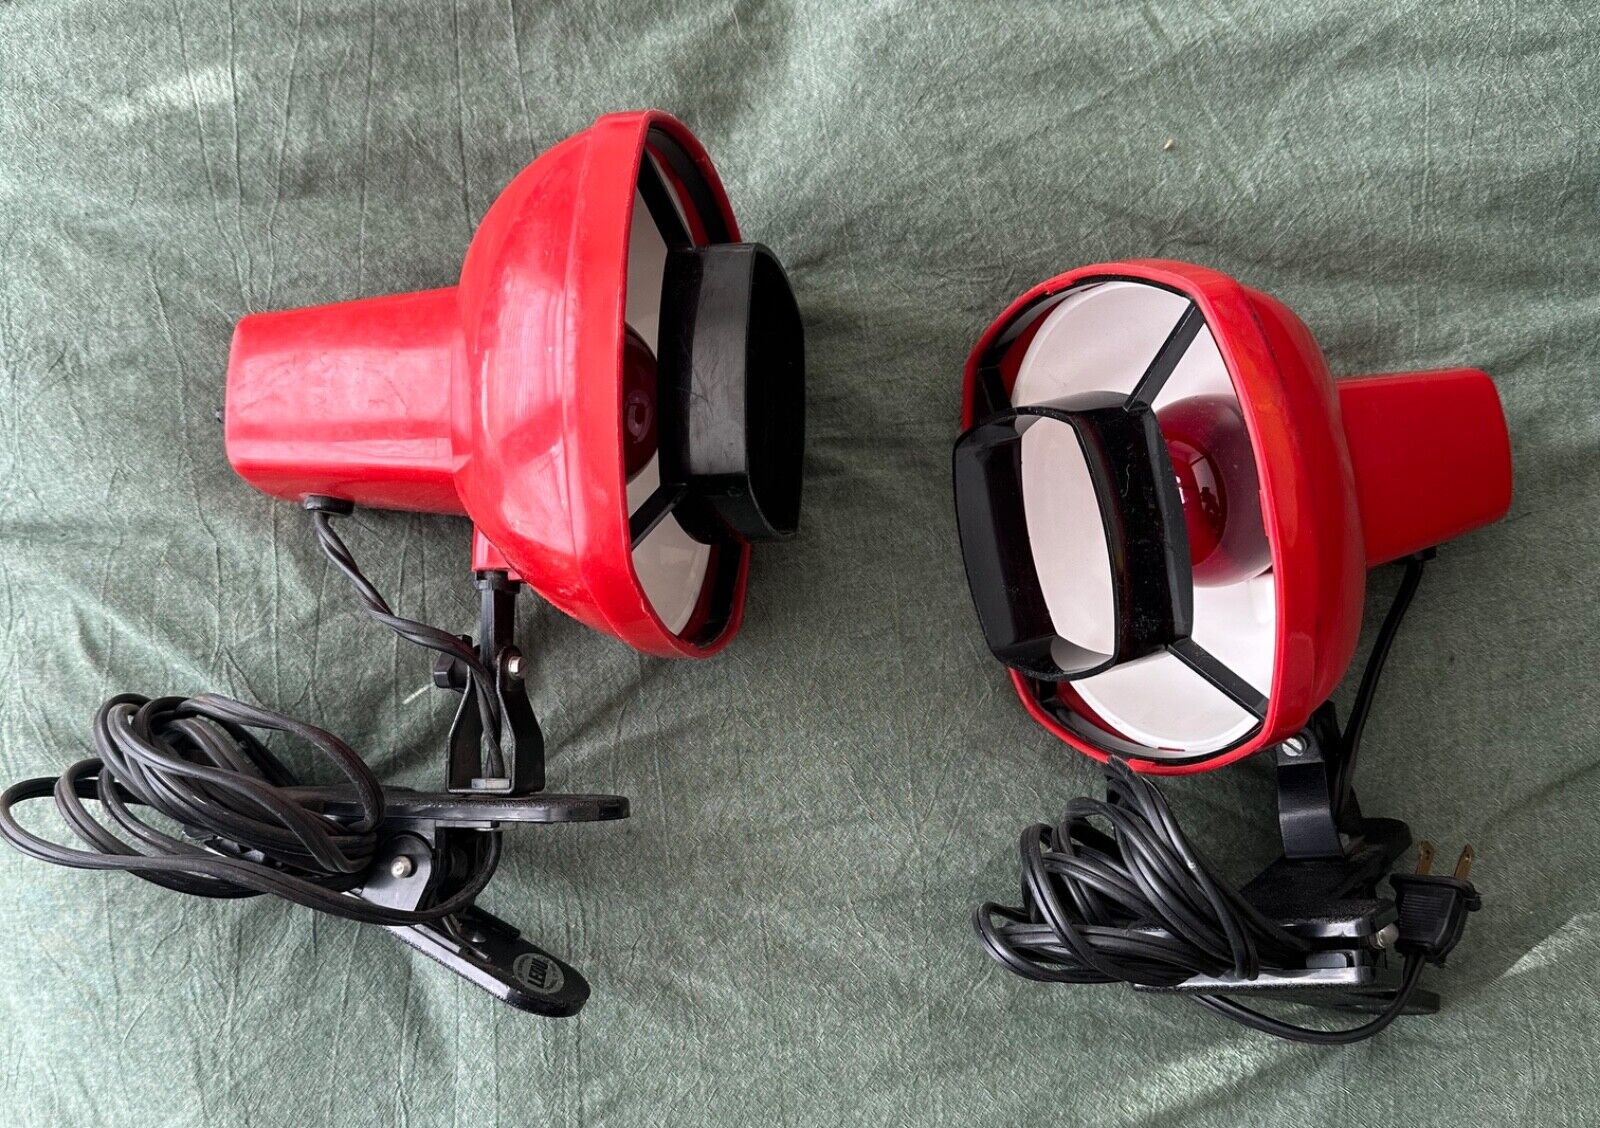 PAIR OF VINTAGE LEDU PLASTIC PORTABLE LIGHTS CLAMP ON CHORDED UNIQUE WORKING RED